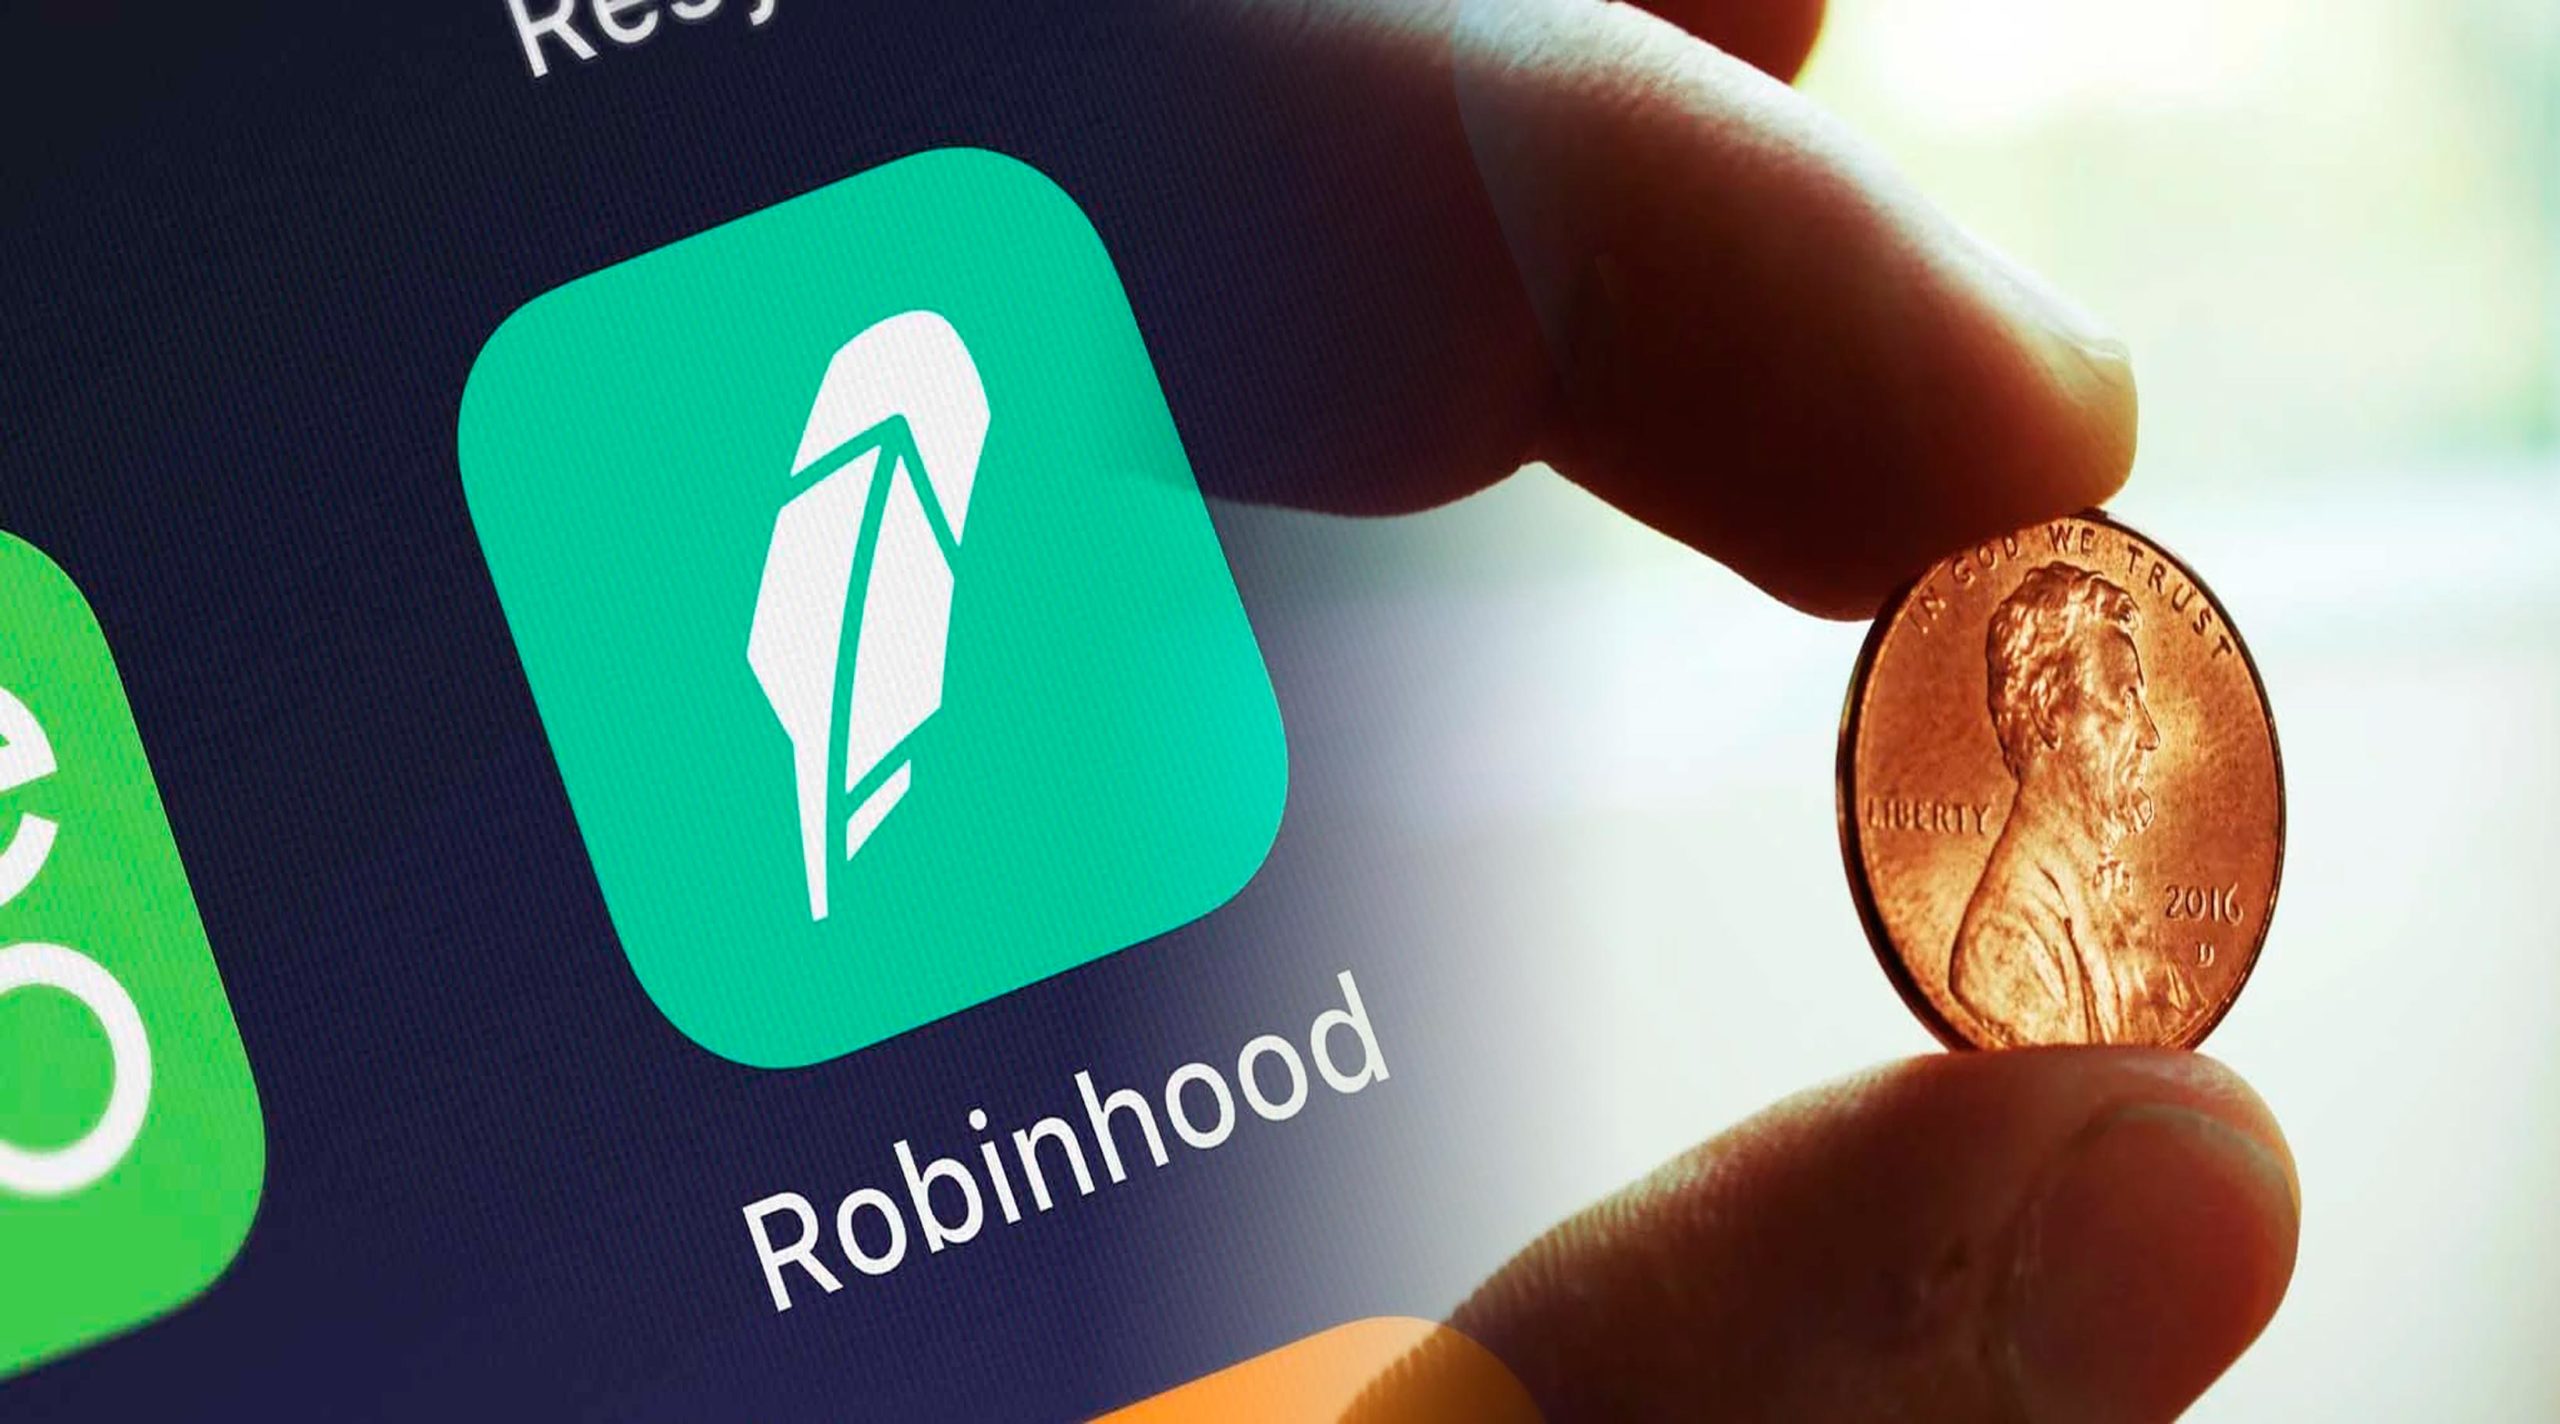 Robinhood Penny Stocks Under 5? Check These 3 Out